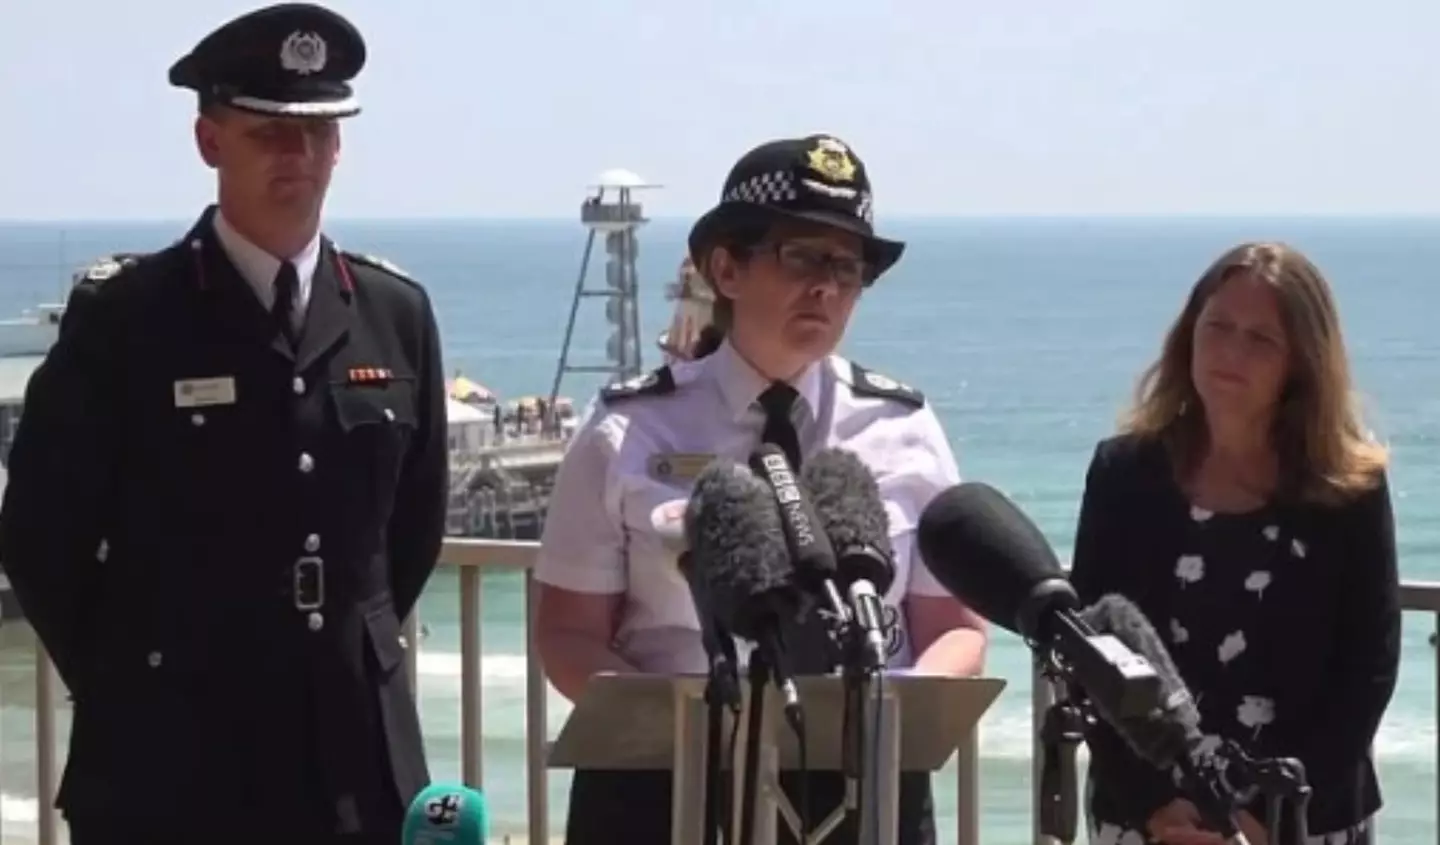 Dorset Police Chief Constable Rachel Farrell said there was no suggestion that pier jumping or jet skis were involved in their deaths.